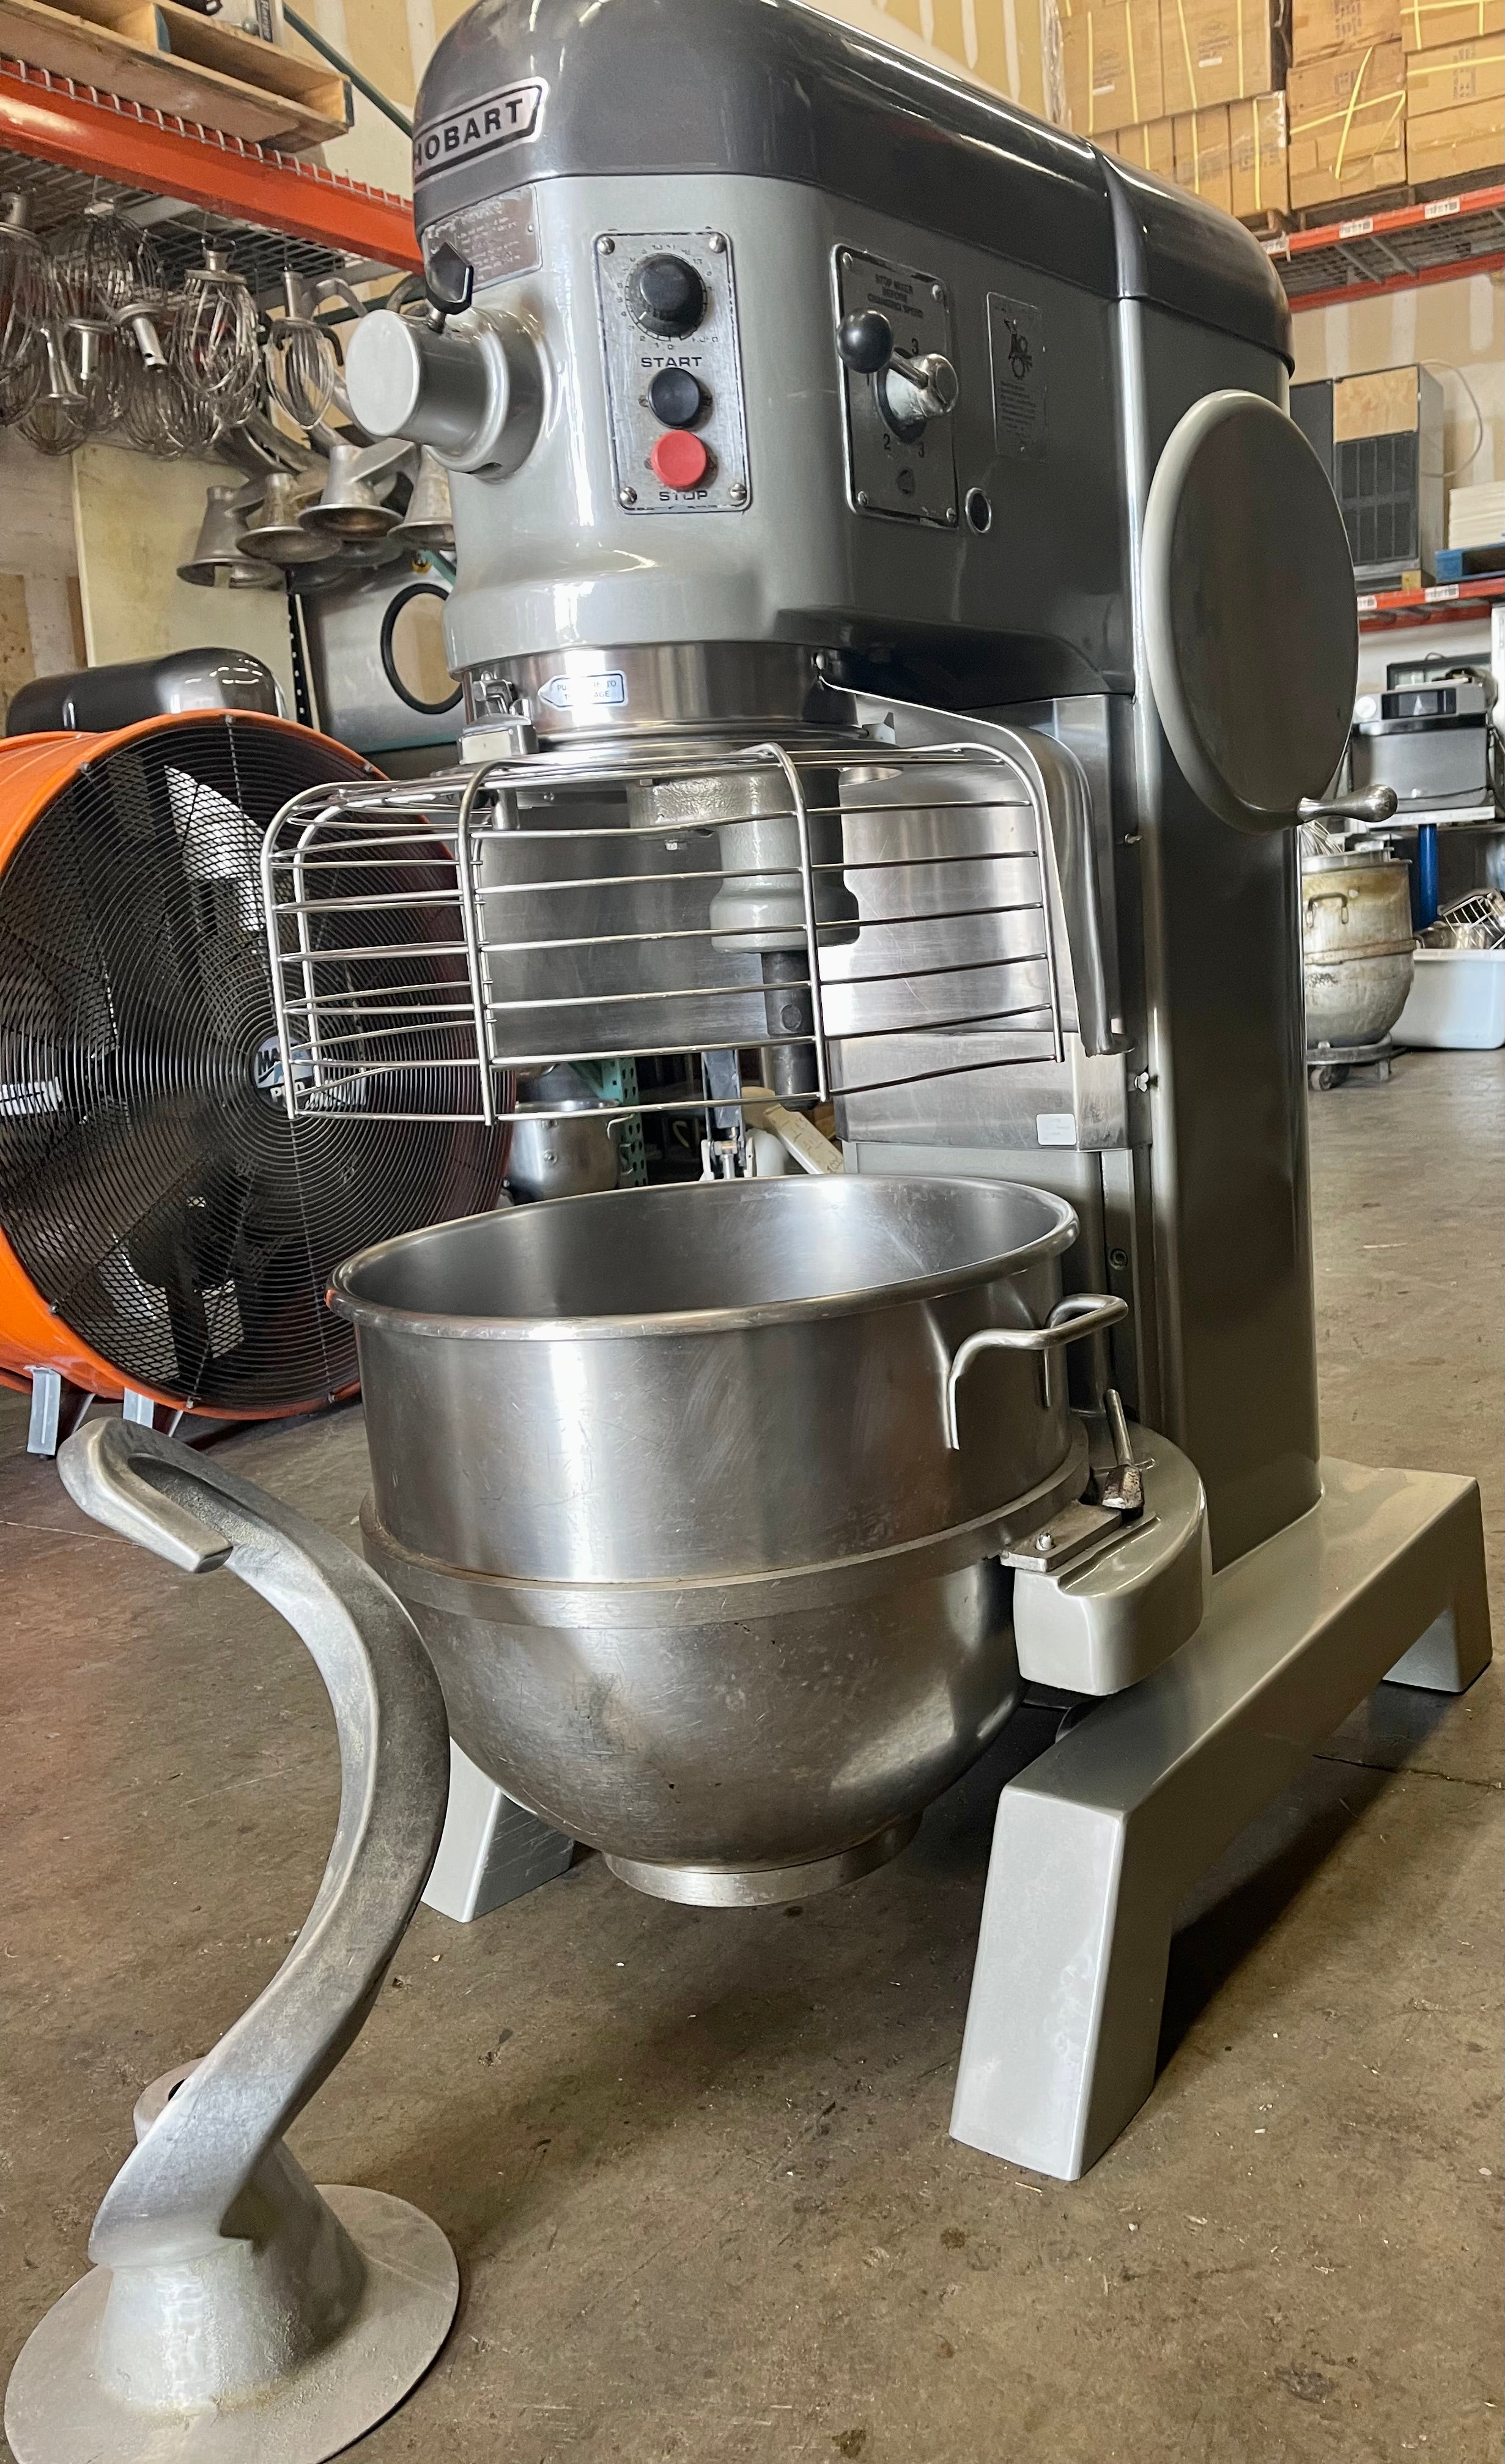 Hobart H600T 3 phase 2HP mixer comes with a stainless steel bowl and one attachment